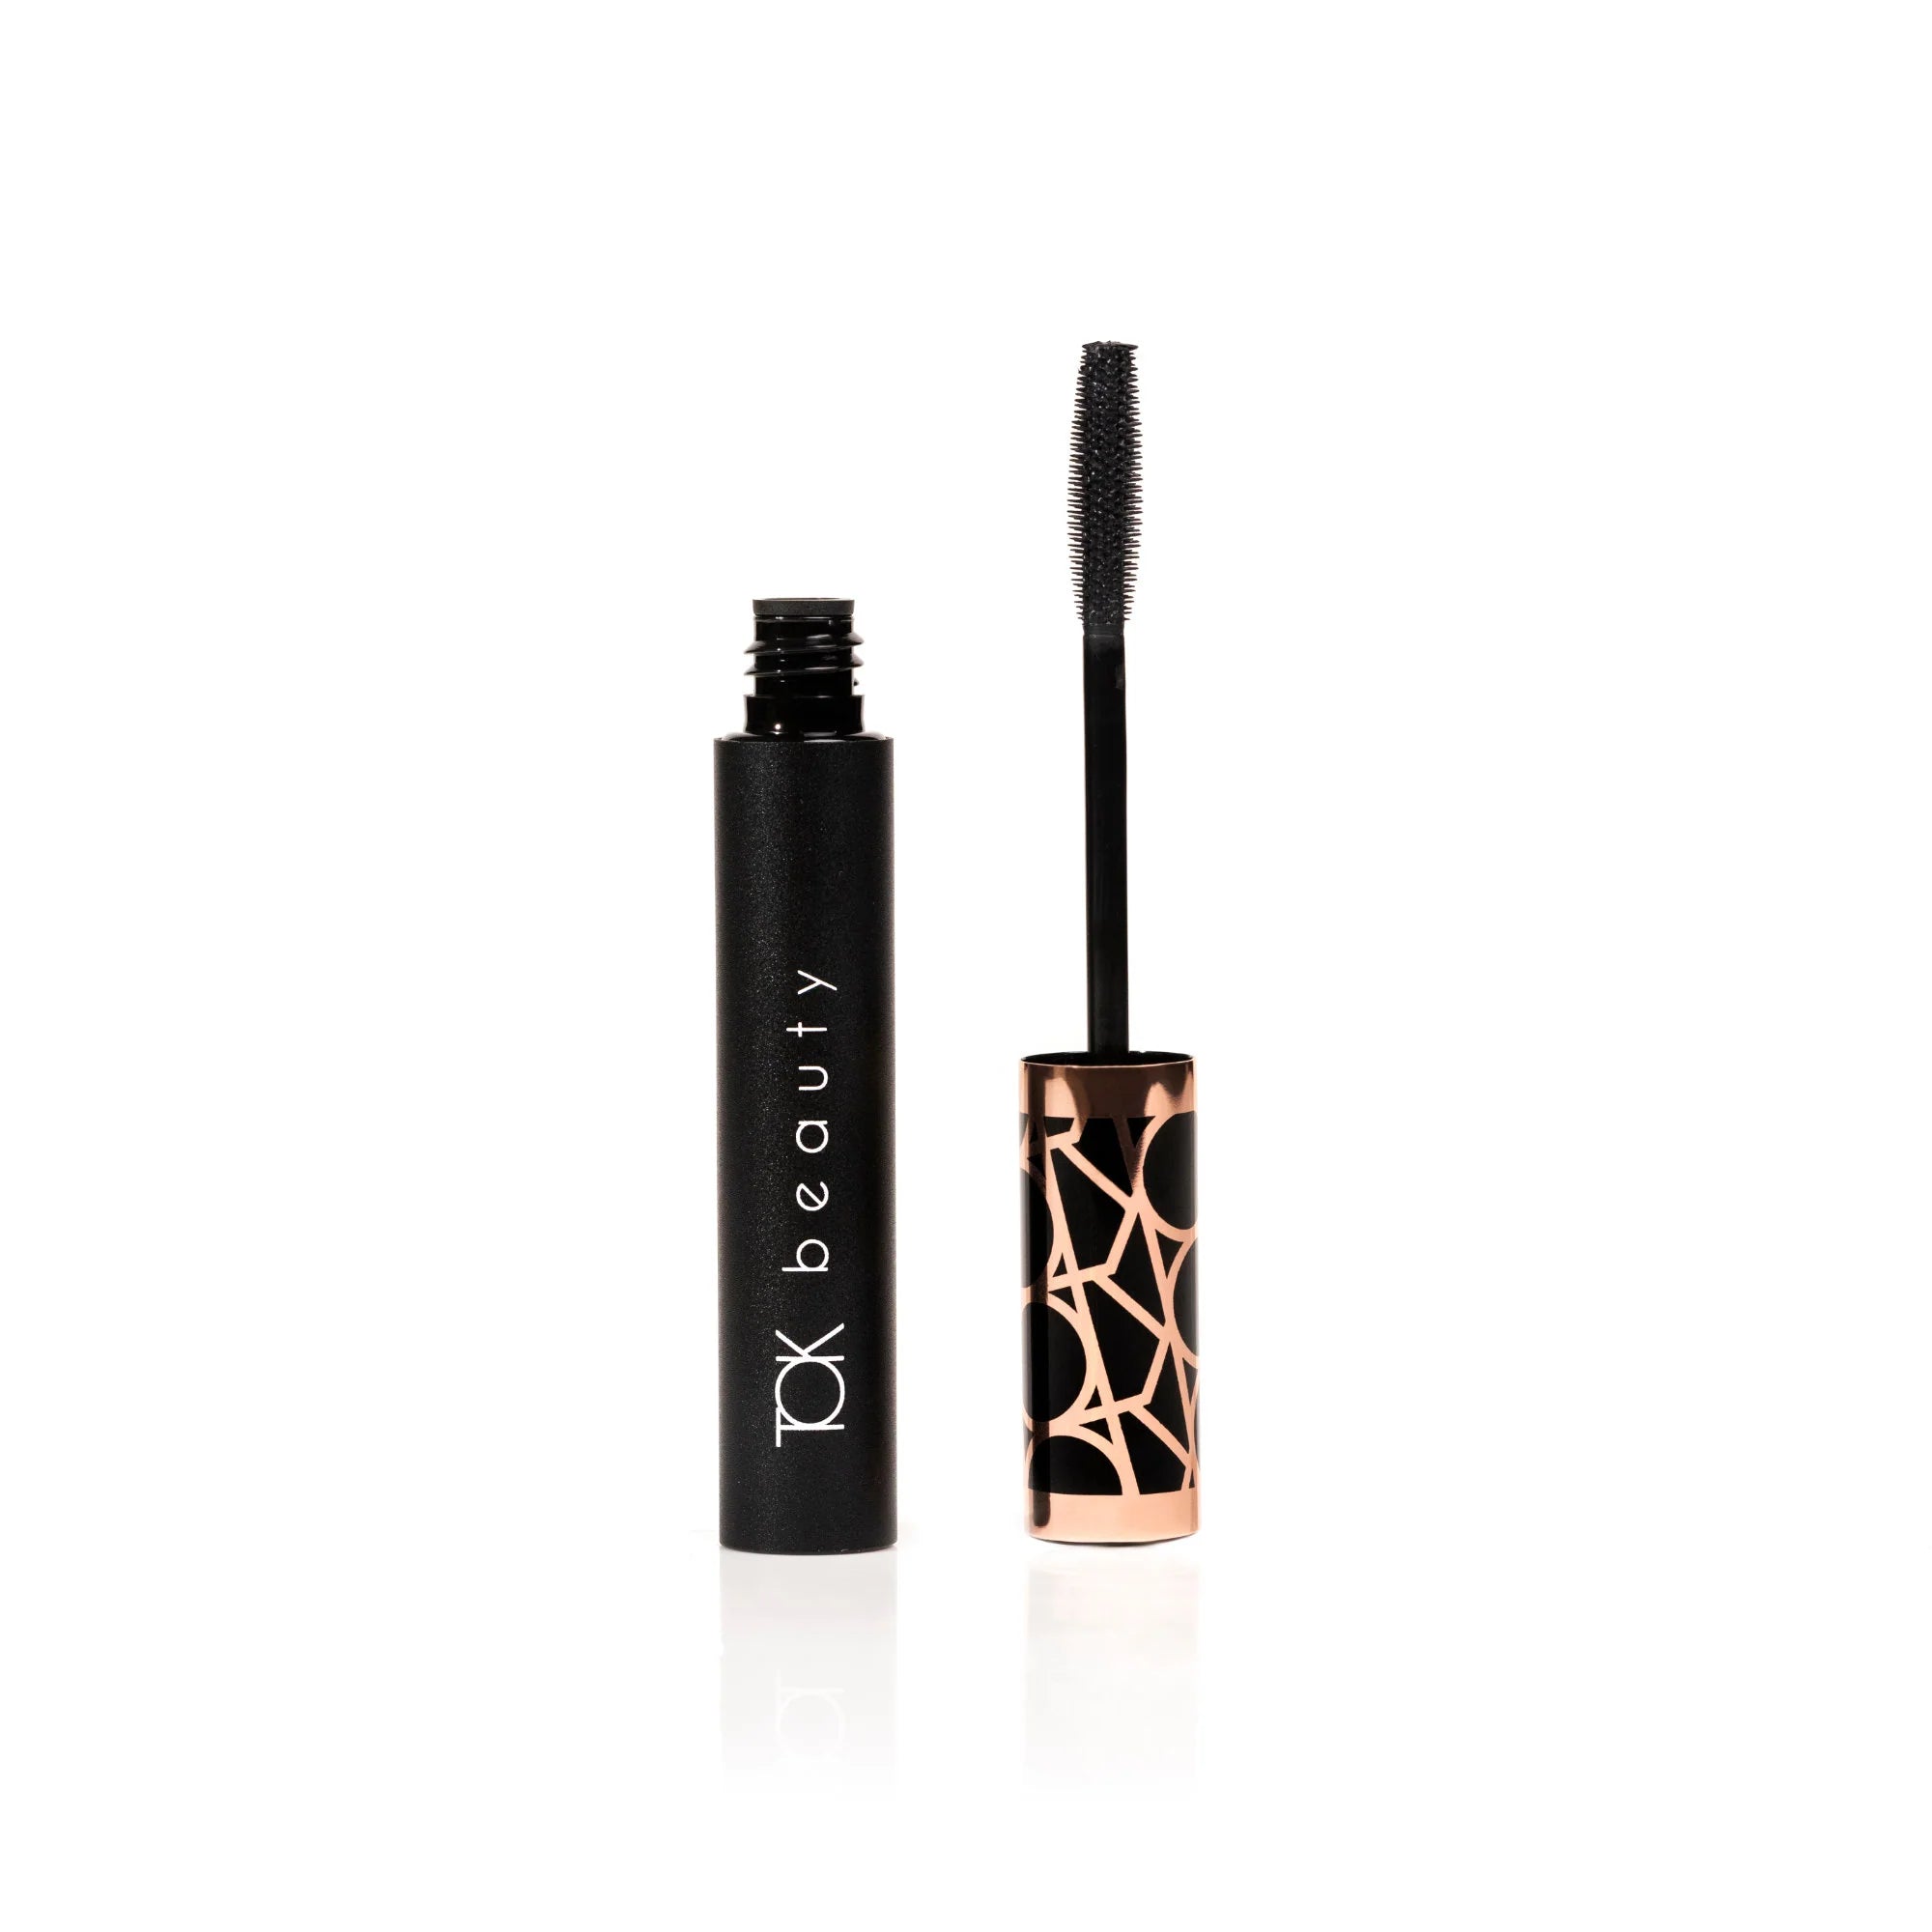 Tok beauty mascara with wand and color showing.